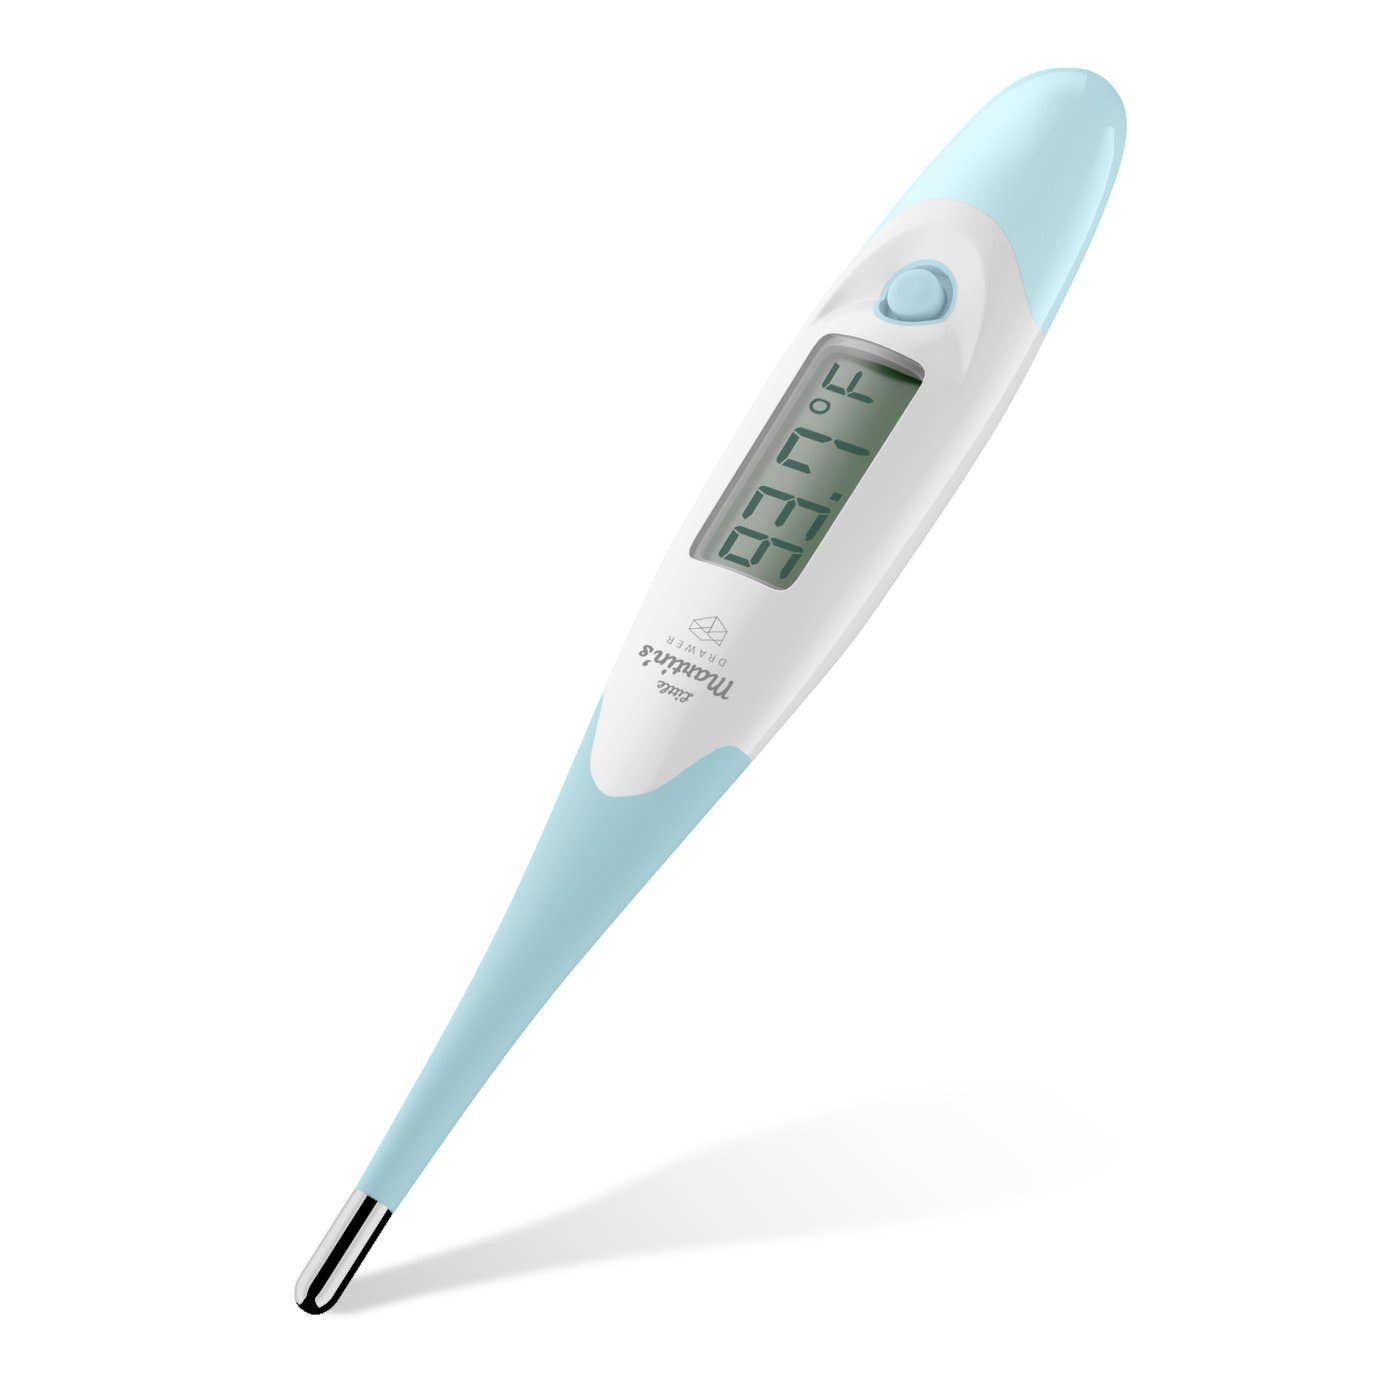 Digital Thermometer (Oral/Rectal/Armpit) - Blue